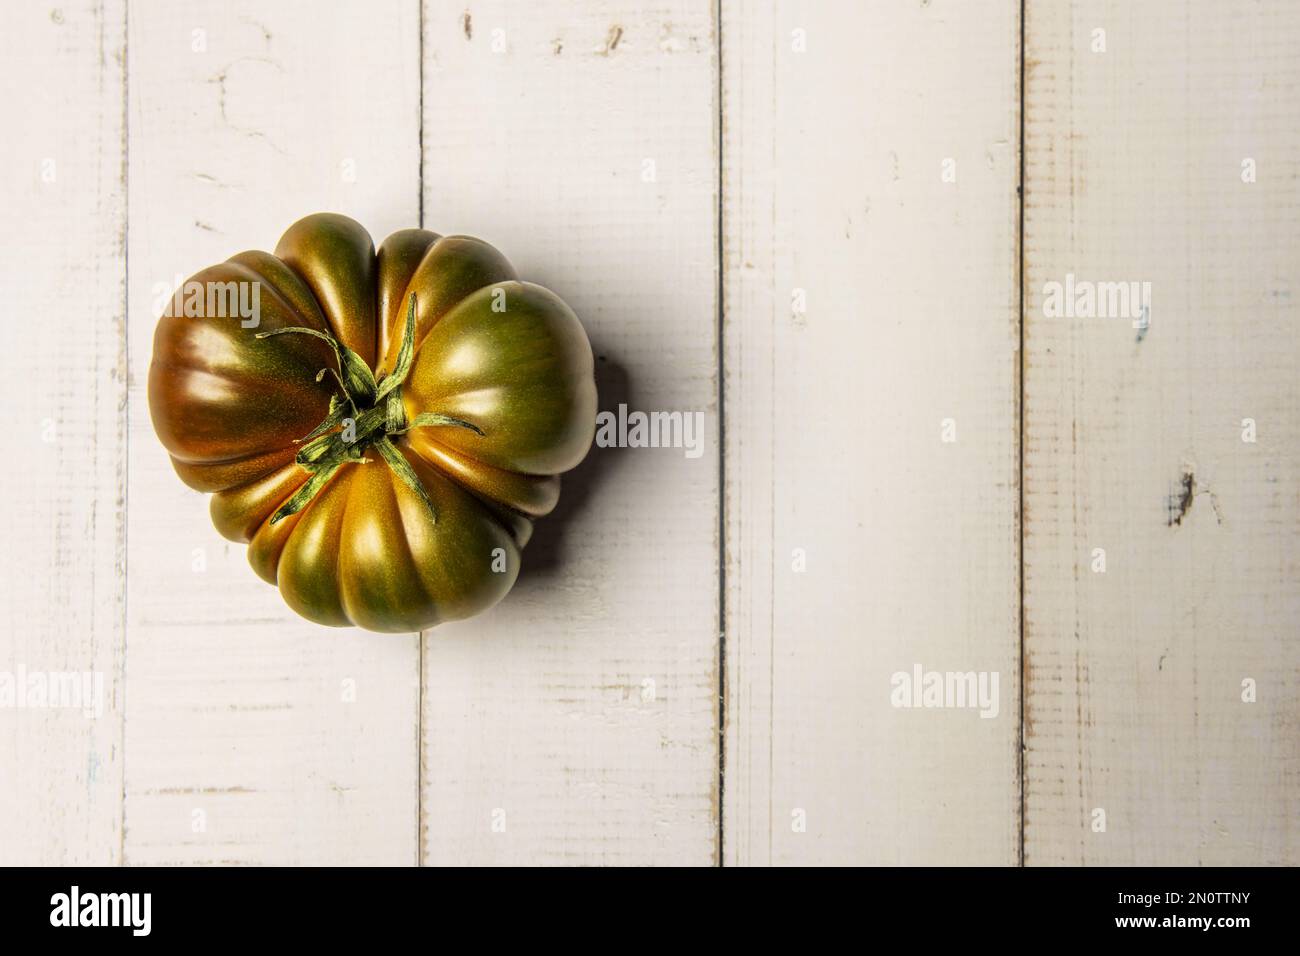 PNG image of a ripe marmande sweet tomato on a white wooden table Stock Photo